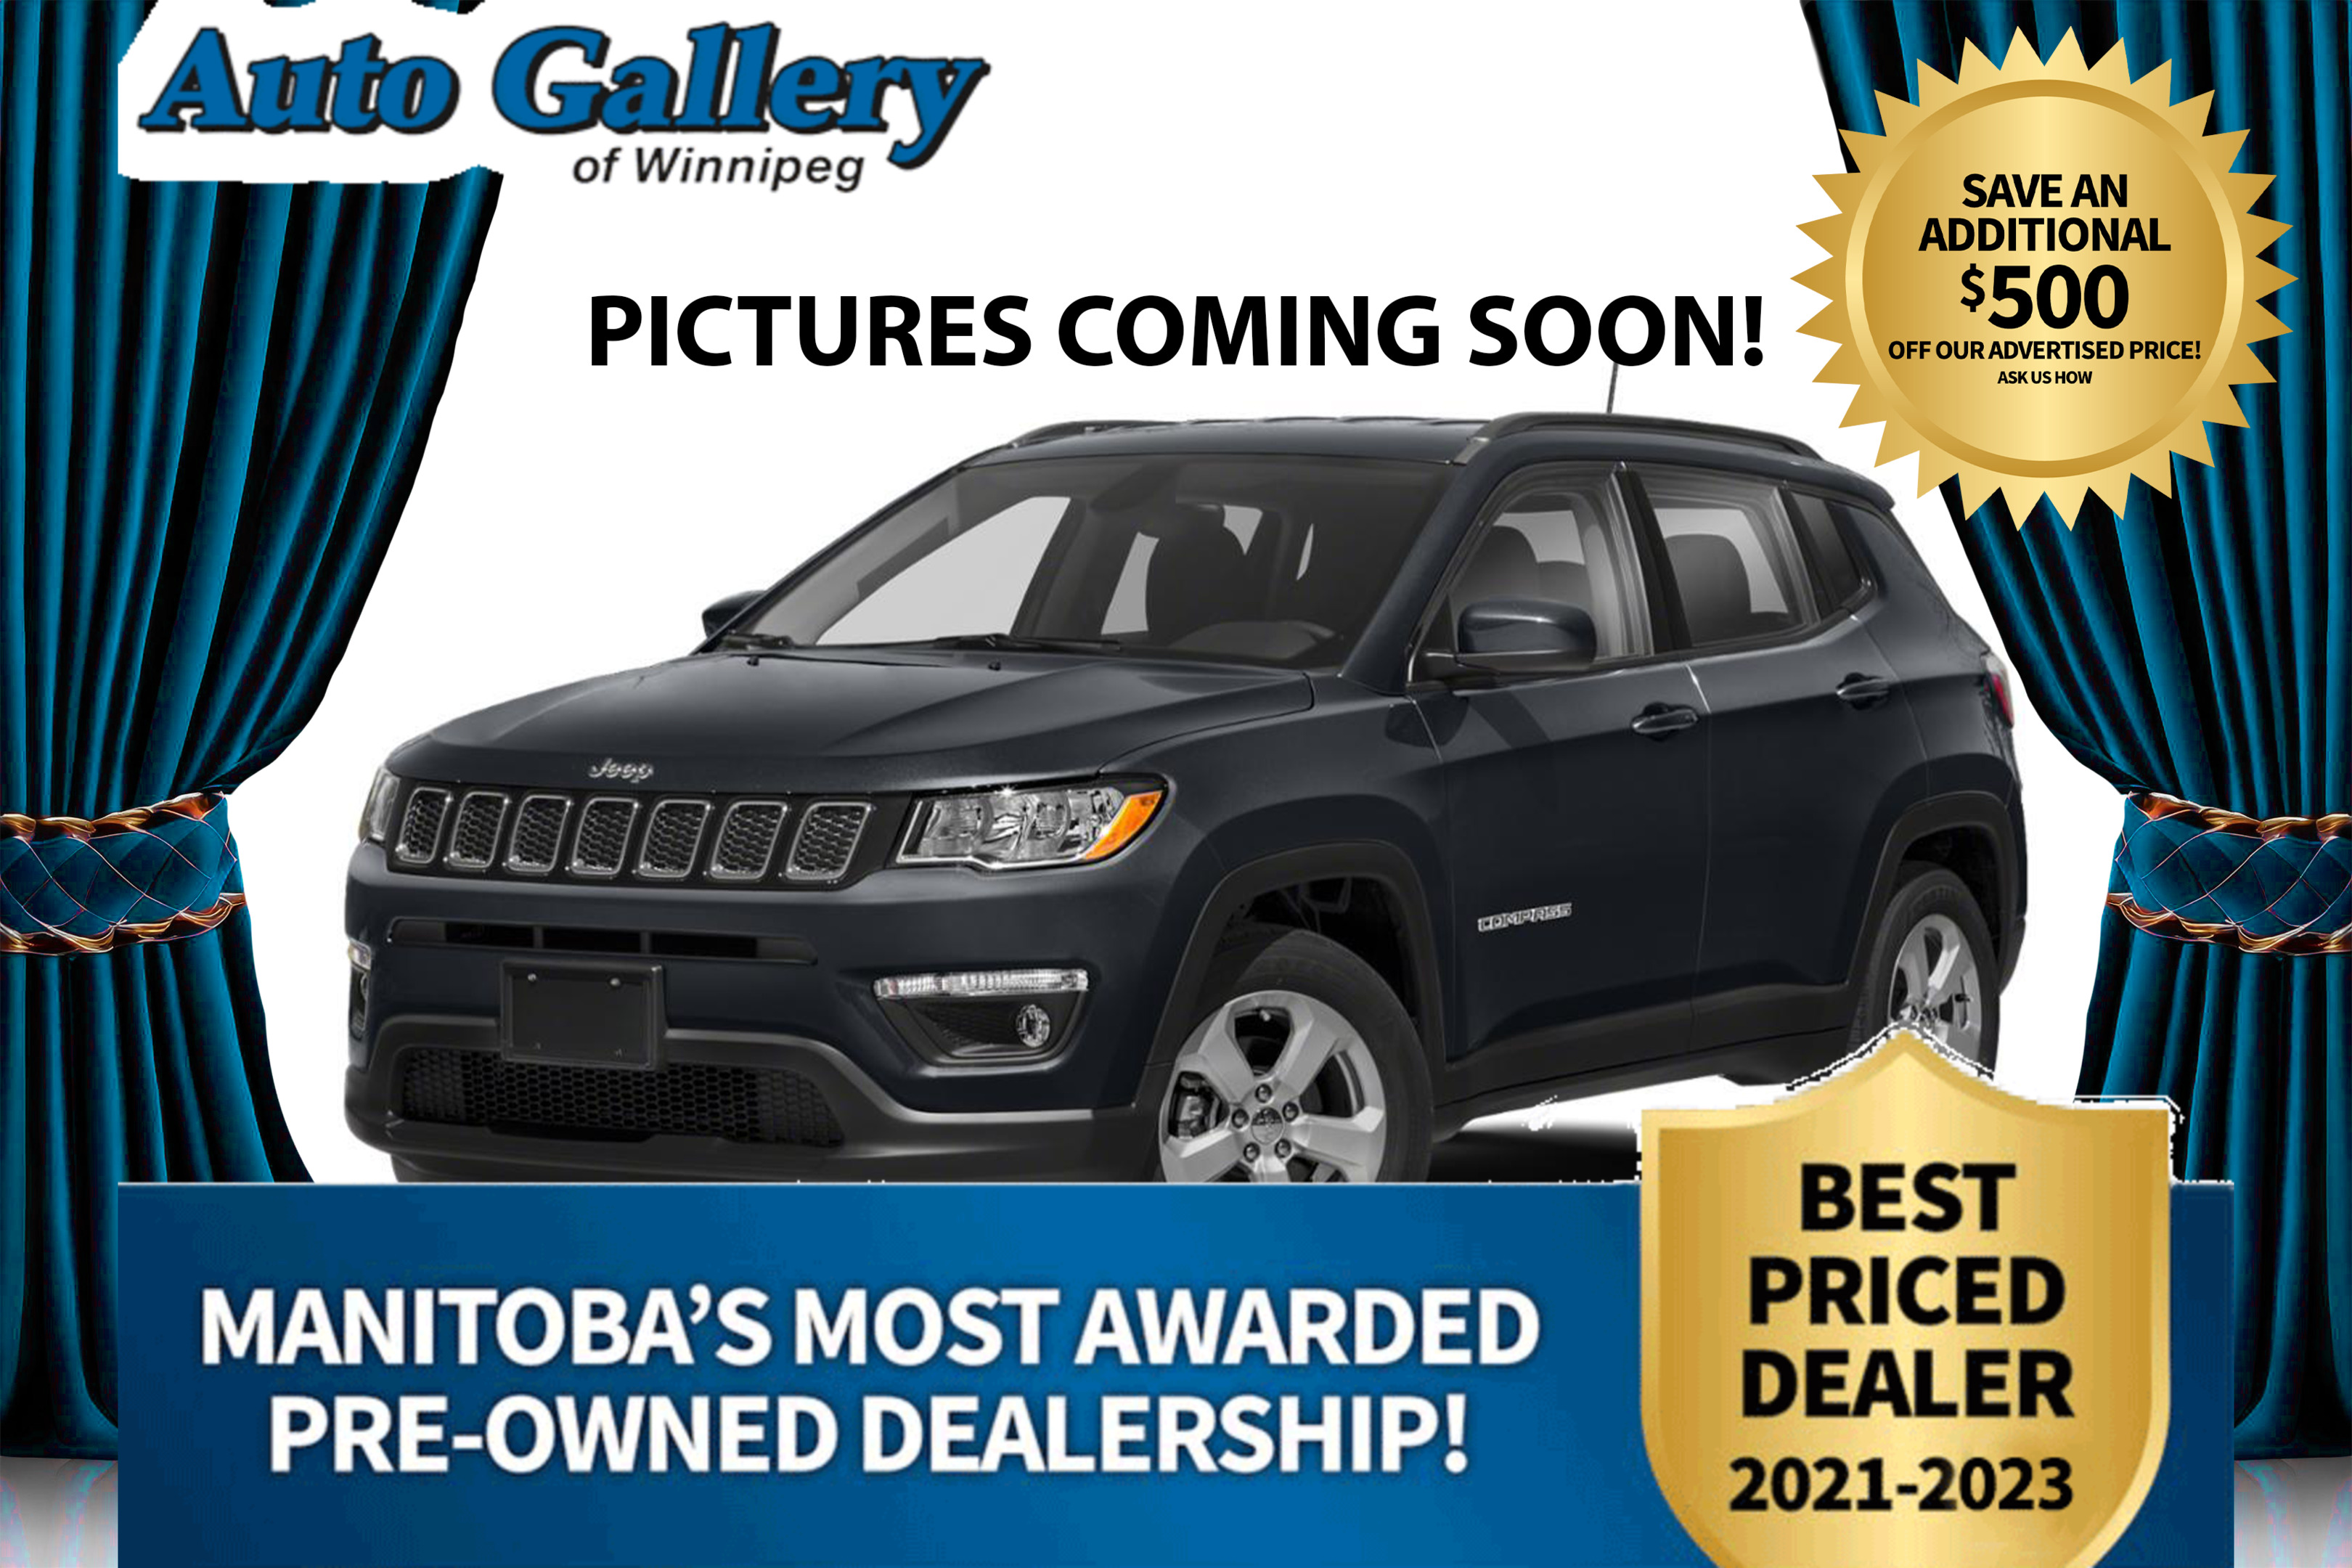 2018 Jeep Compass Limited 4x4, NAVIGATION, REMOTE START, SUNROOF!